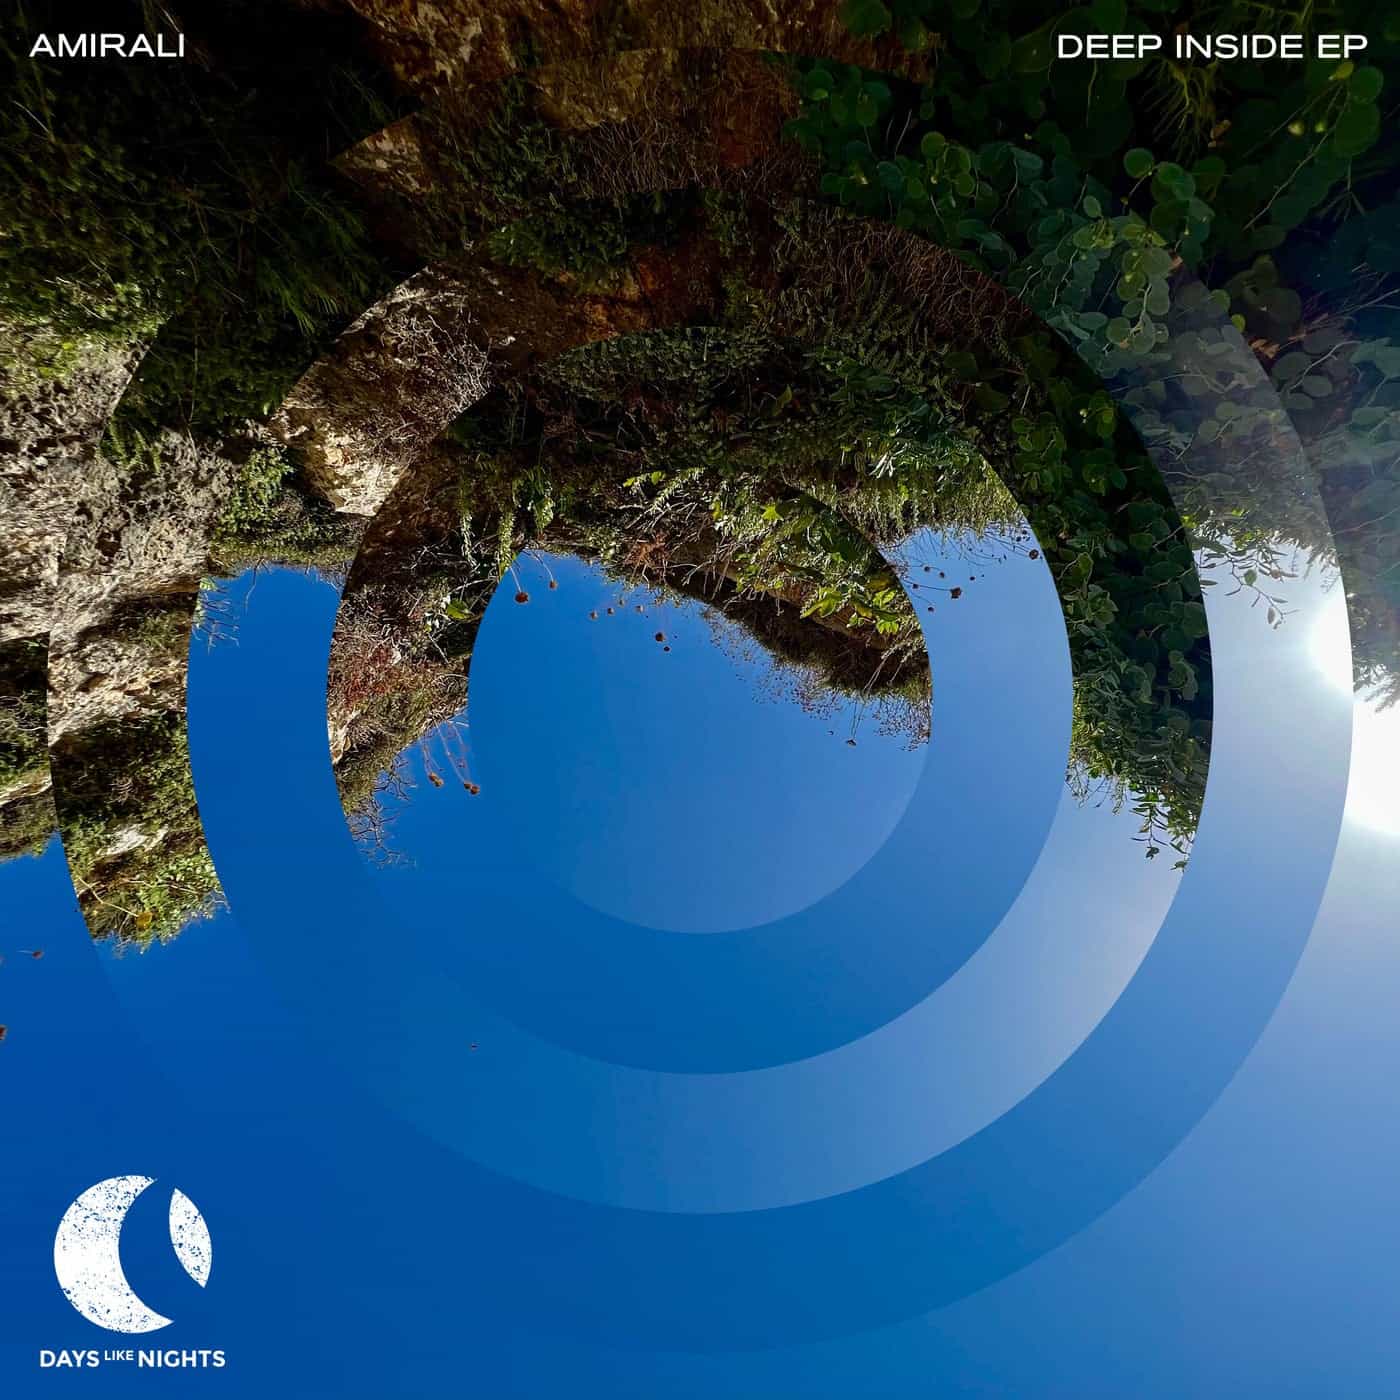 image cover: Deep Inside by Amirali on DAYS like NIGHTS